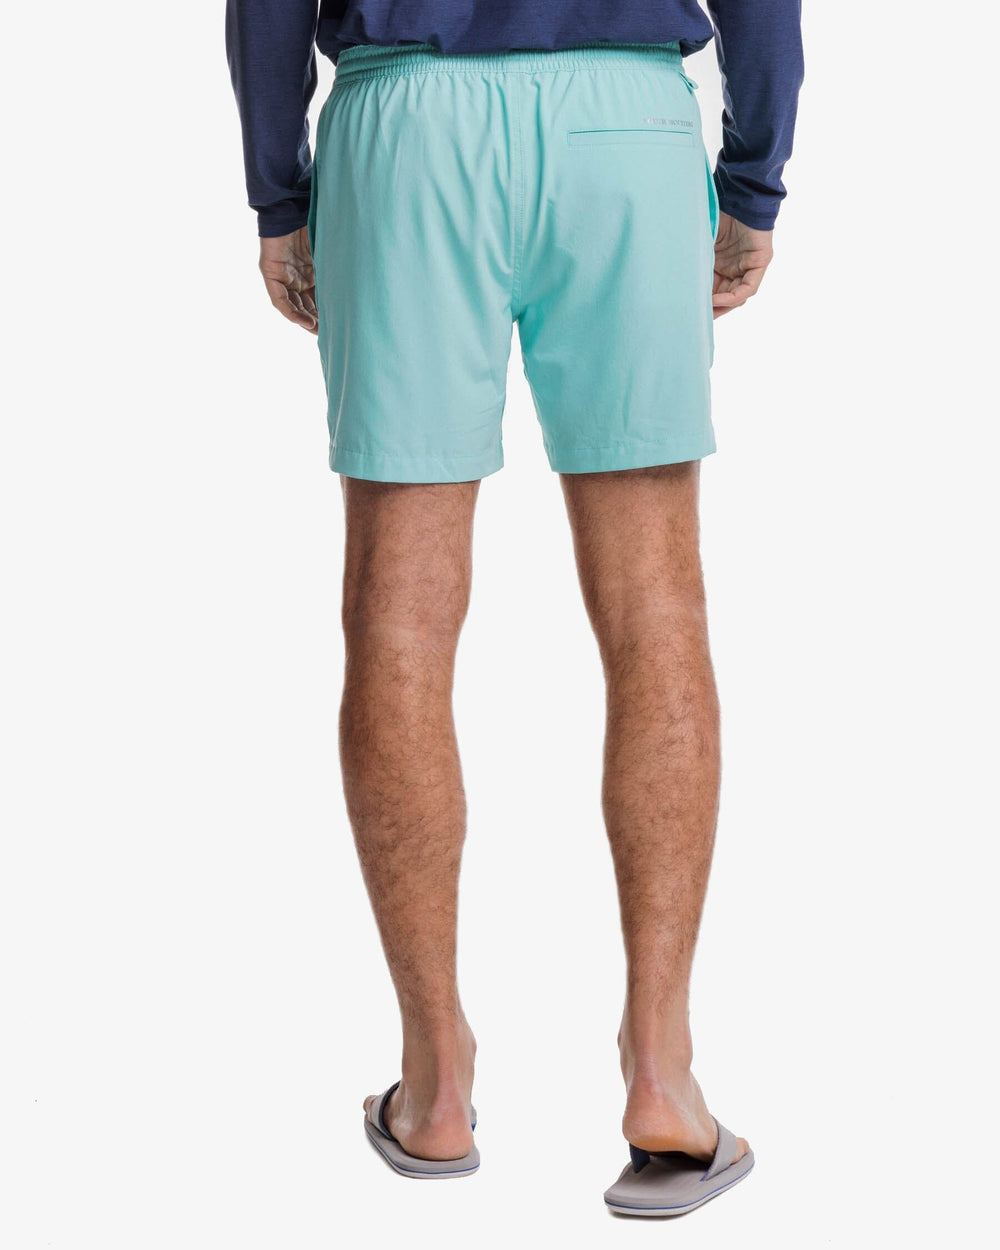 The back front view of the Men's Rip Channel 6 Inch Performance Short by Southern Tide - Mint